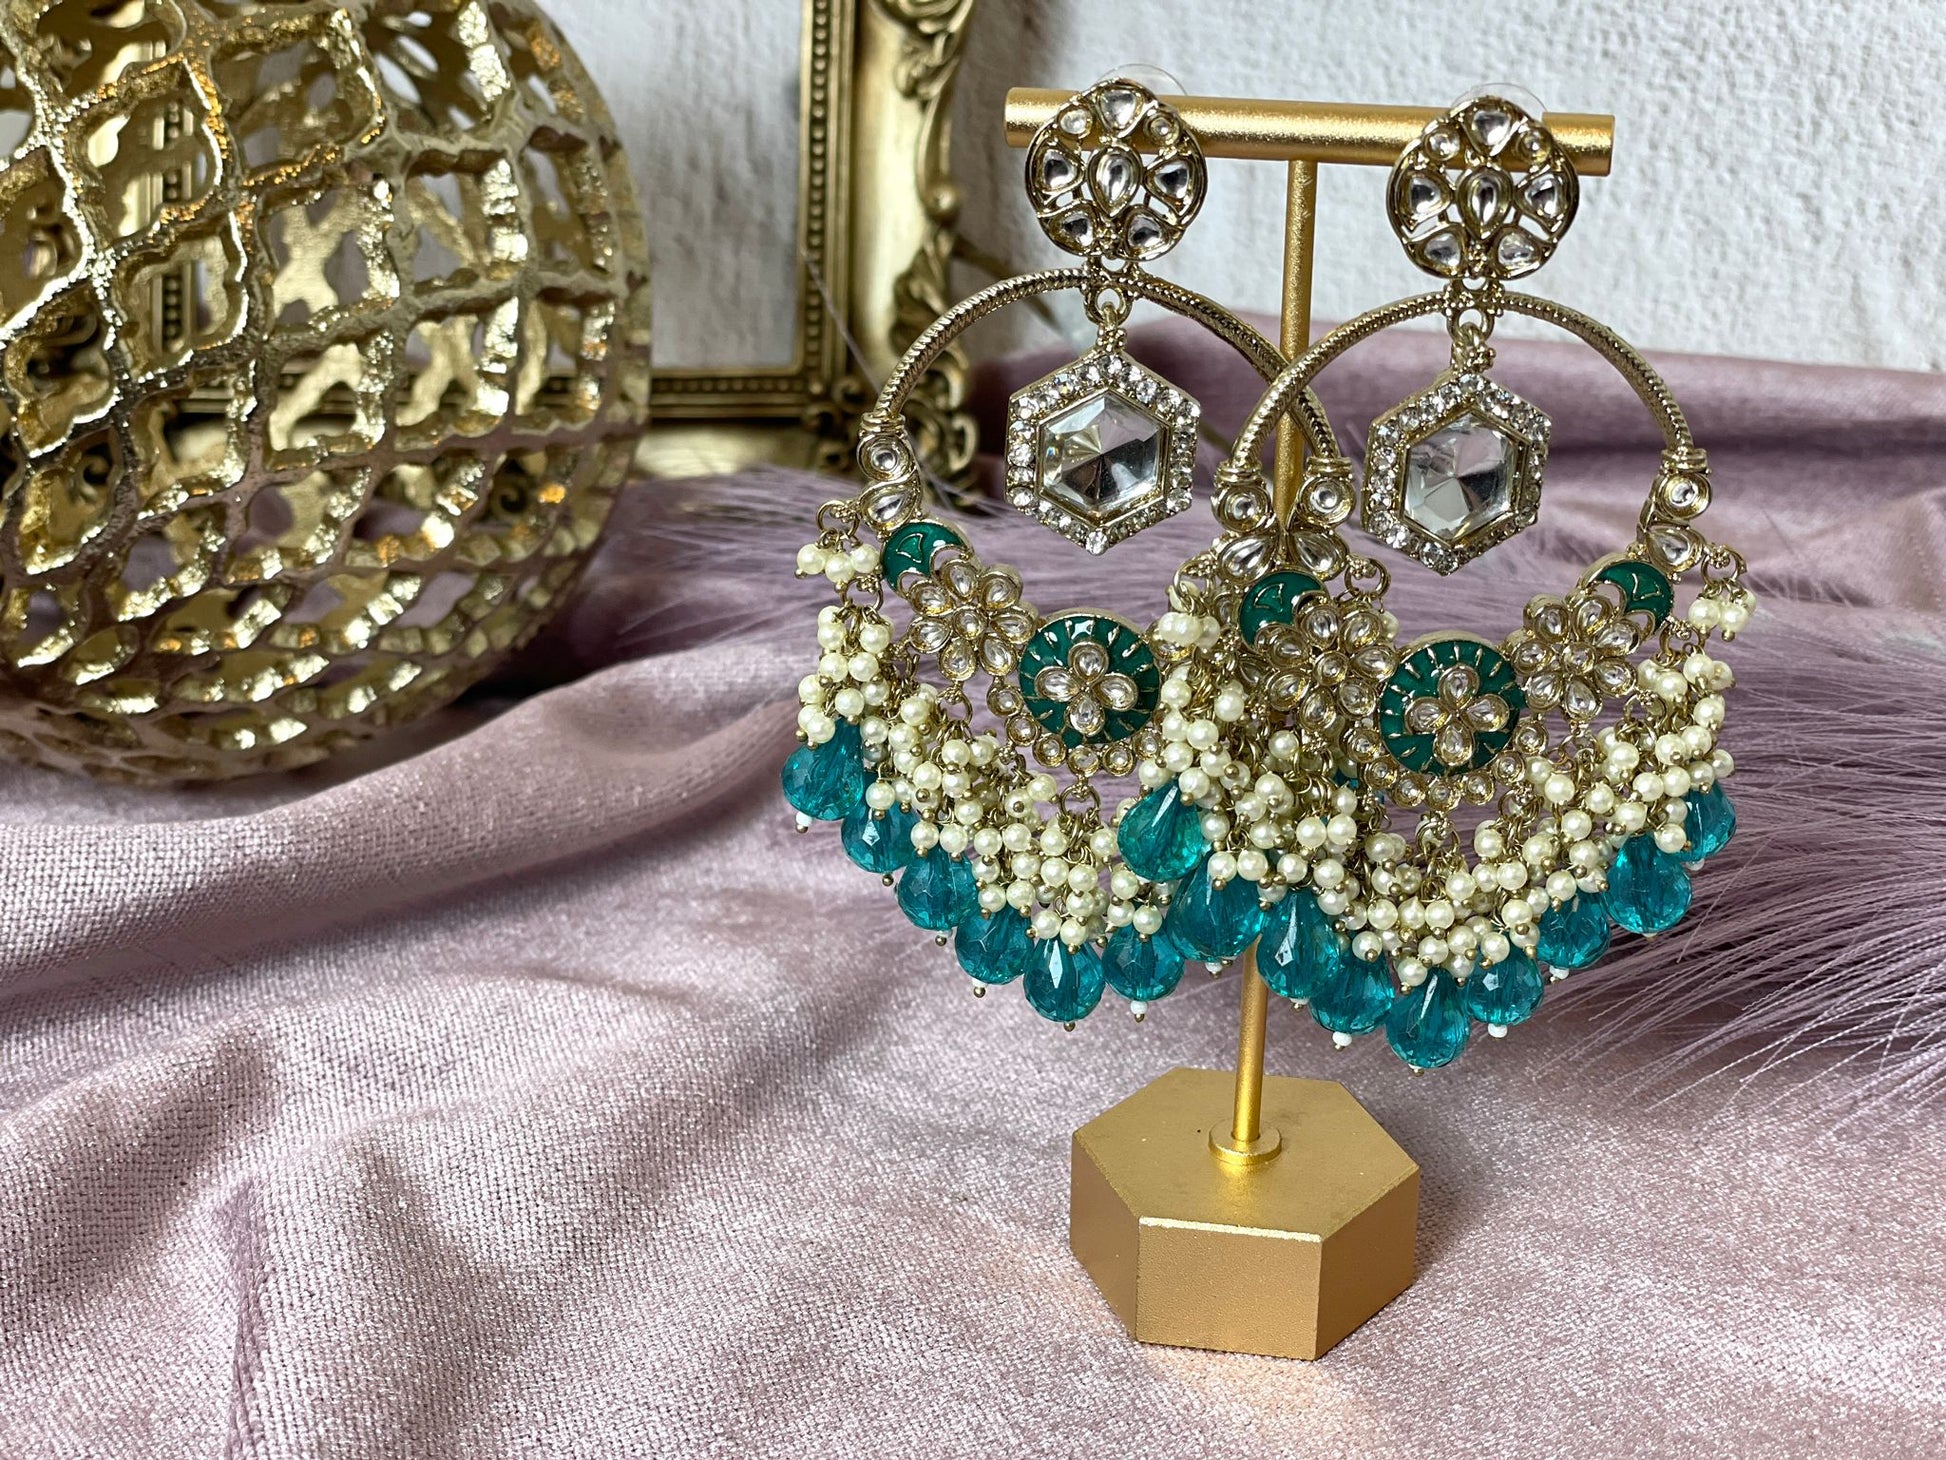 Teal Chandbalis Perfect Accessories to Brighten Your Look